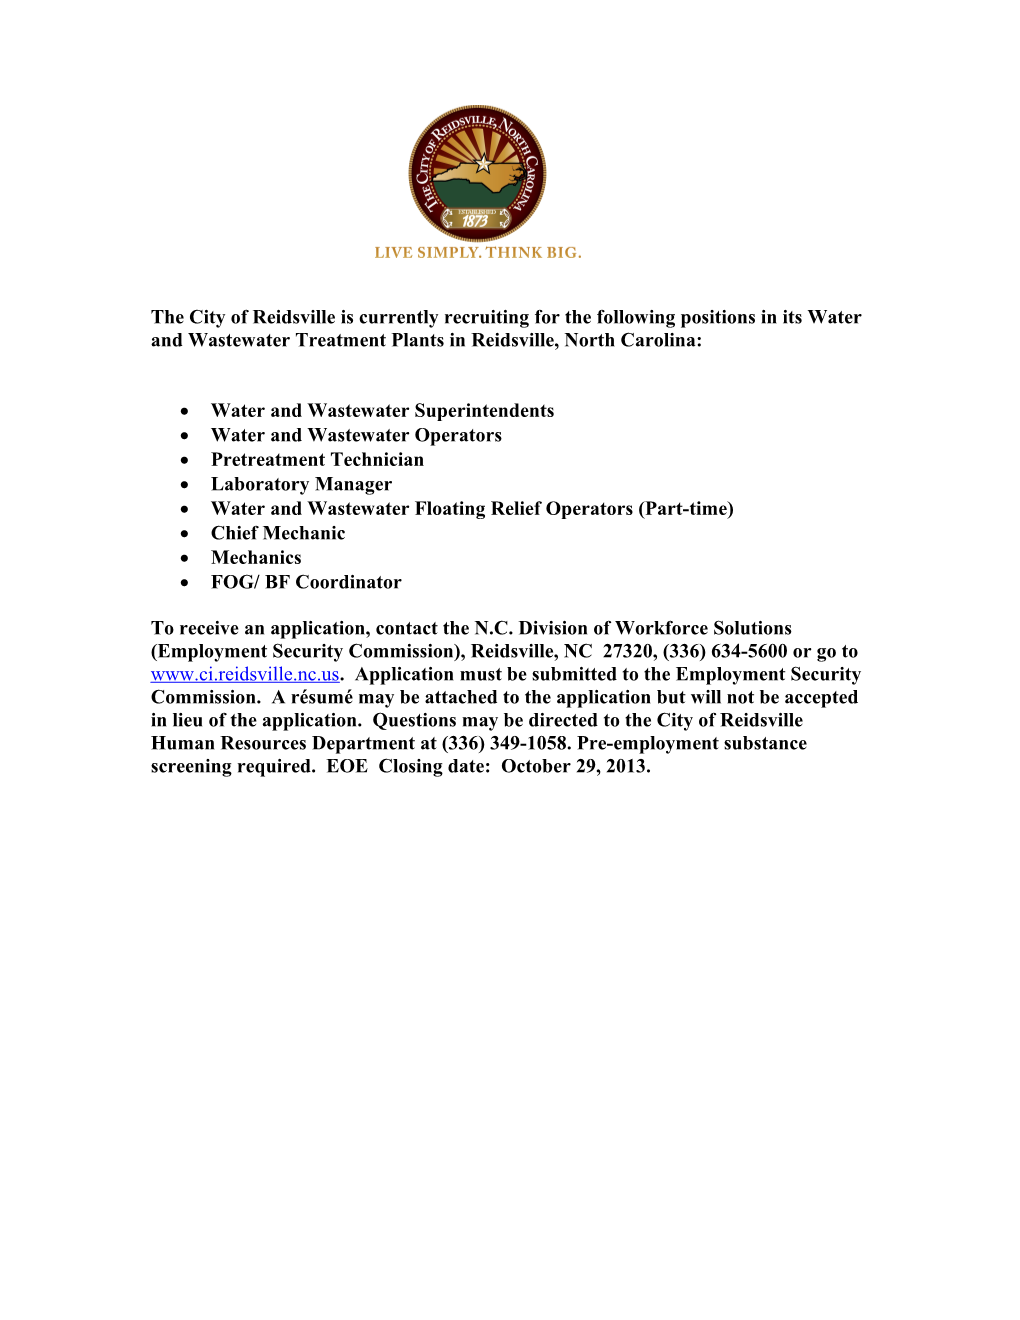 The City of Reidsville Is Currently Recruiting for the Following Positions in Its Water